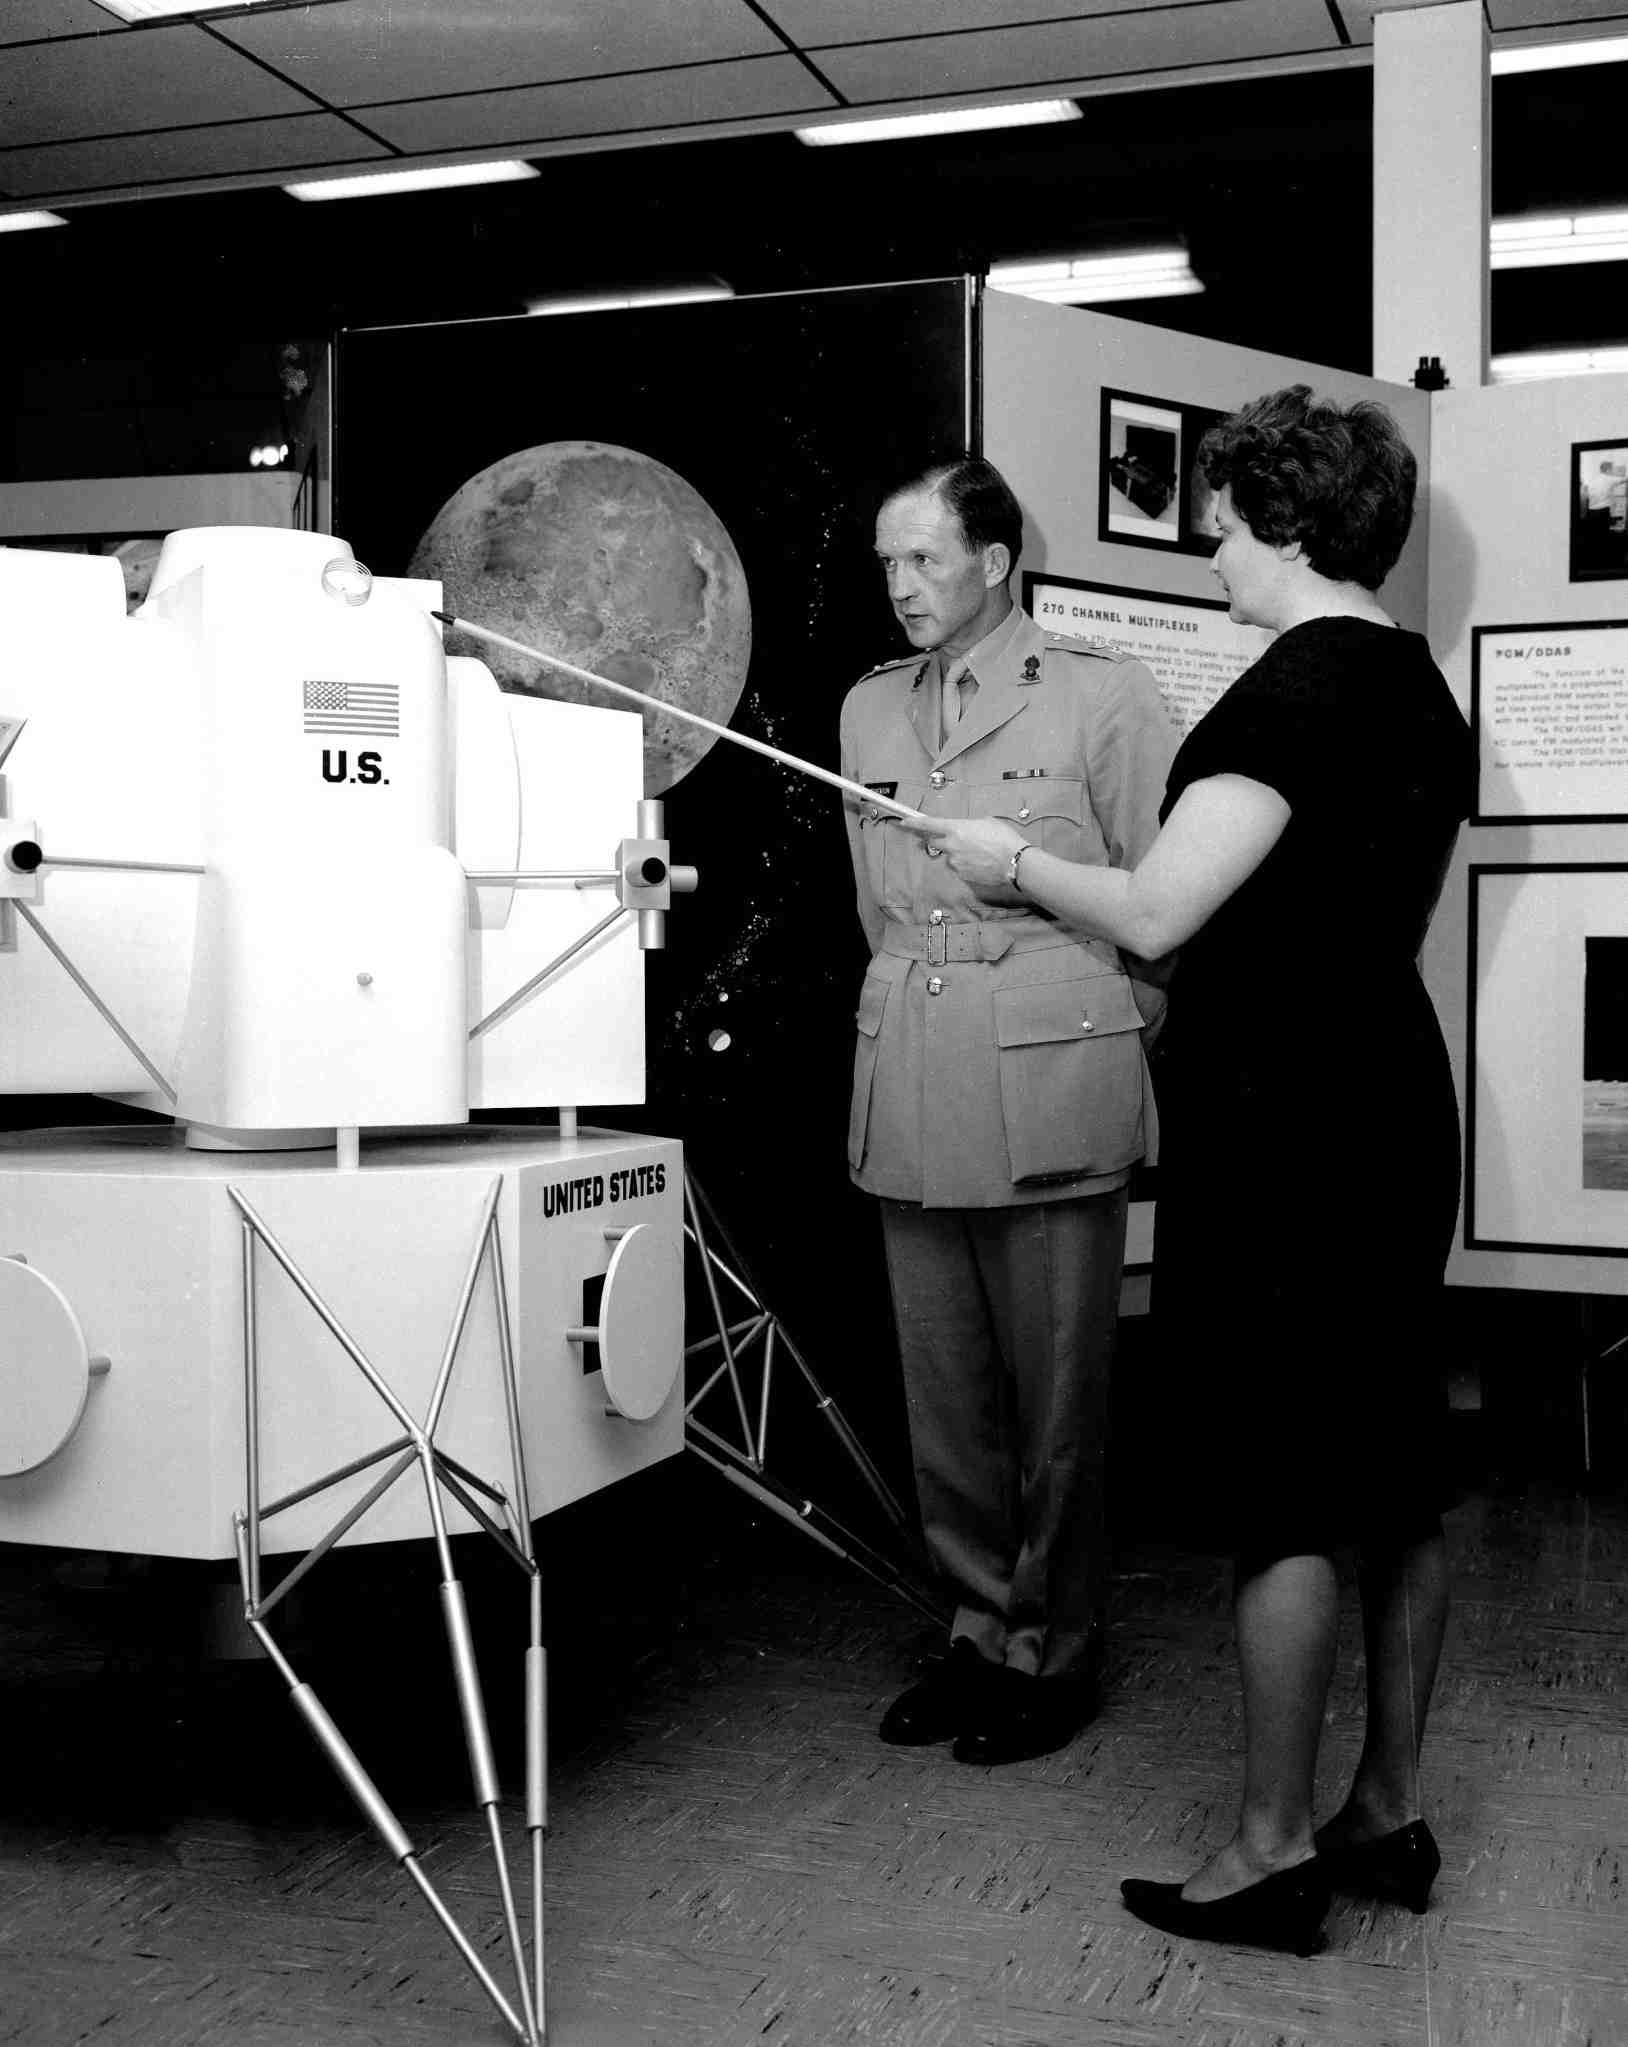 Evelyn Falkowski and British Colonel John Stevenson discussing space hardware exhibit at the Space Orientation Center.